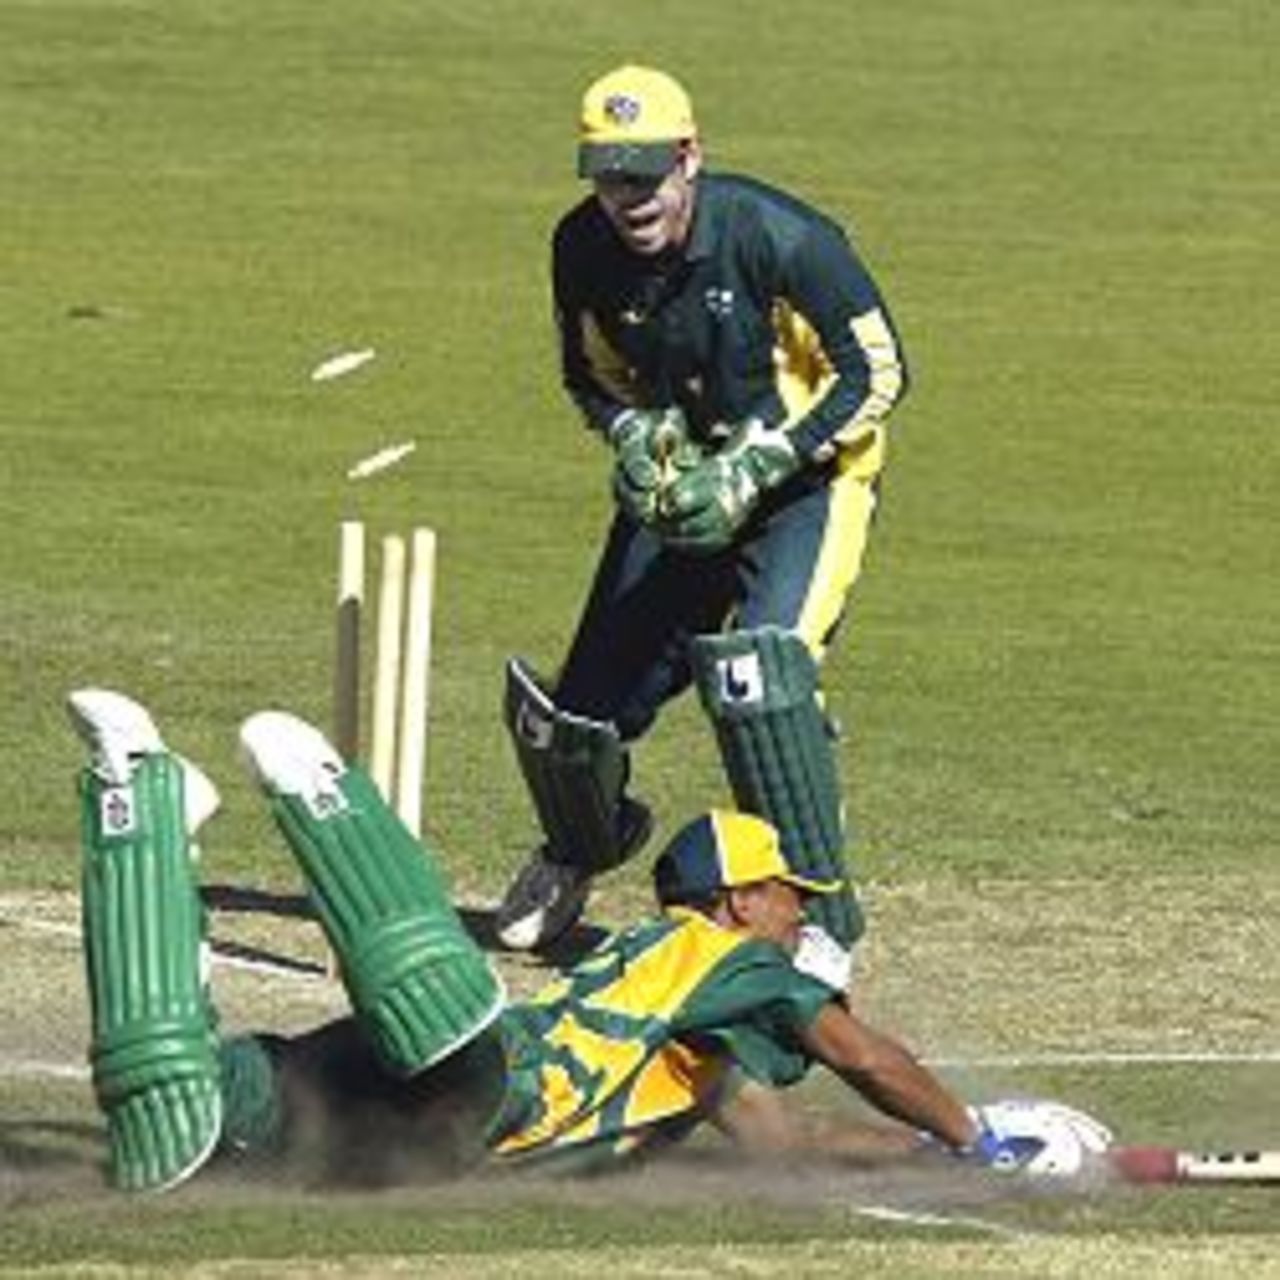 10 Jan 2002: Ryan Campbell of Australia A unsuccessfully attempts to run out Makhaya Ntini of South Africa off the last ball of the innings, during the One Day match between Australia A and South Africa, played at the Adelaide Oval, Adelaide, Australia.